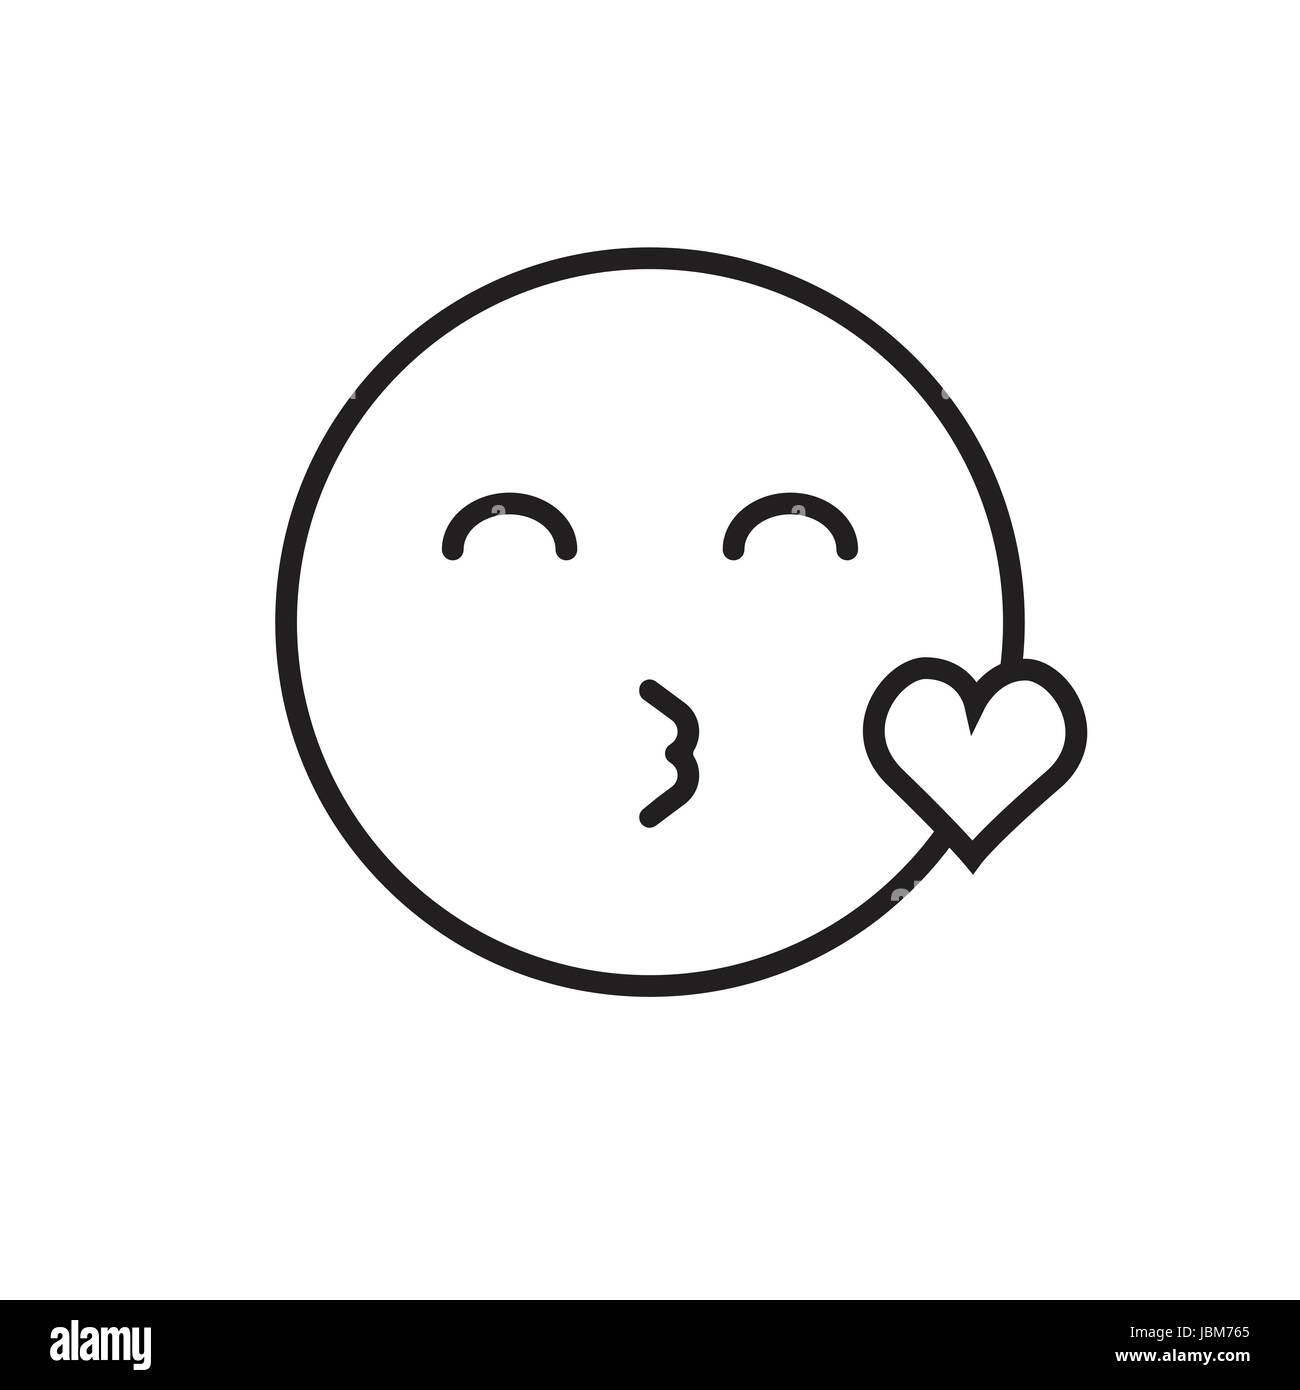 Smiling Cartoon Face Blowing Kiss Positive People Emotion Icon Stock Vector